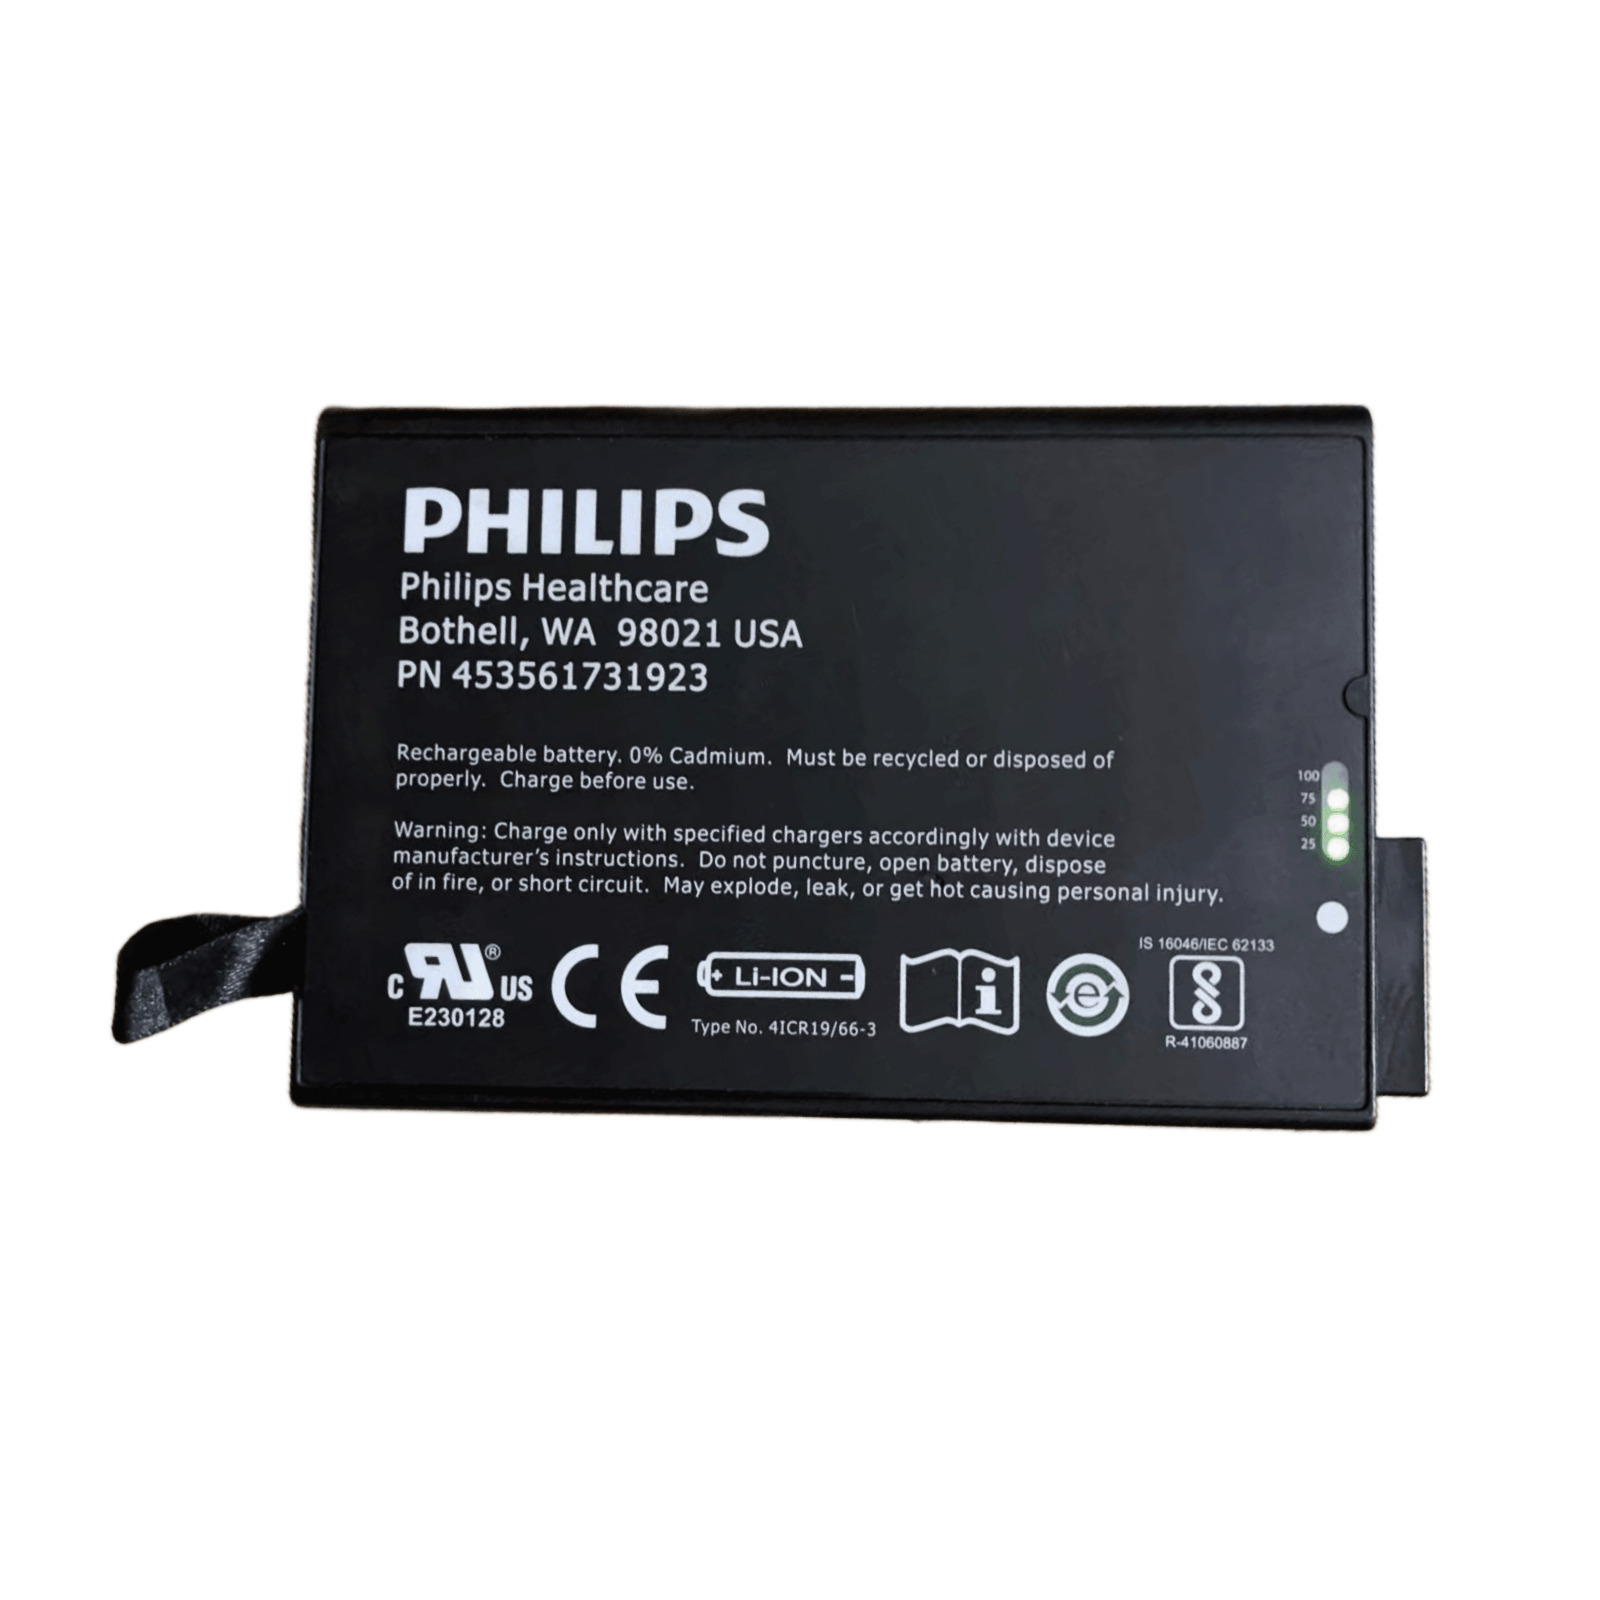 PN 453561731923 New Genuine for Philips WA 98021 Healthcare Battery 41CR19/66-3